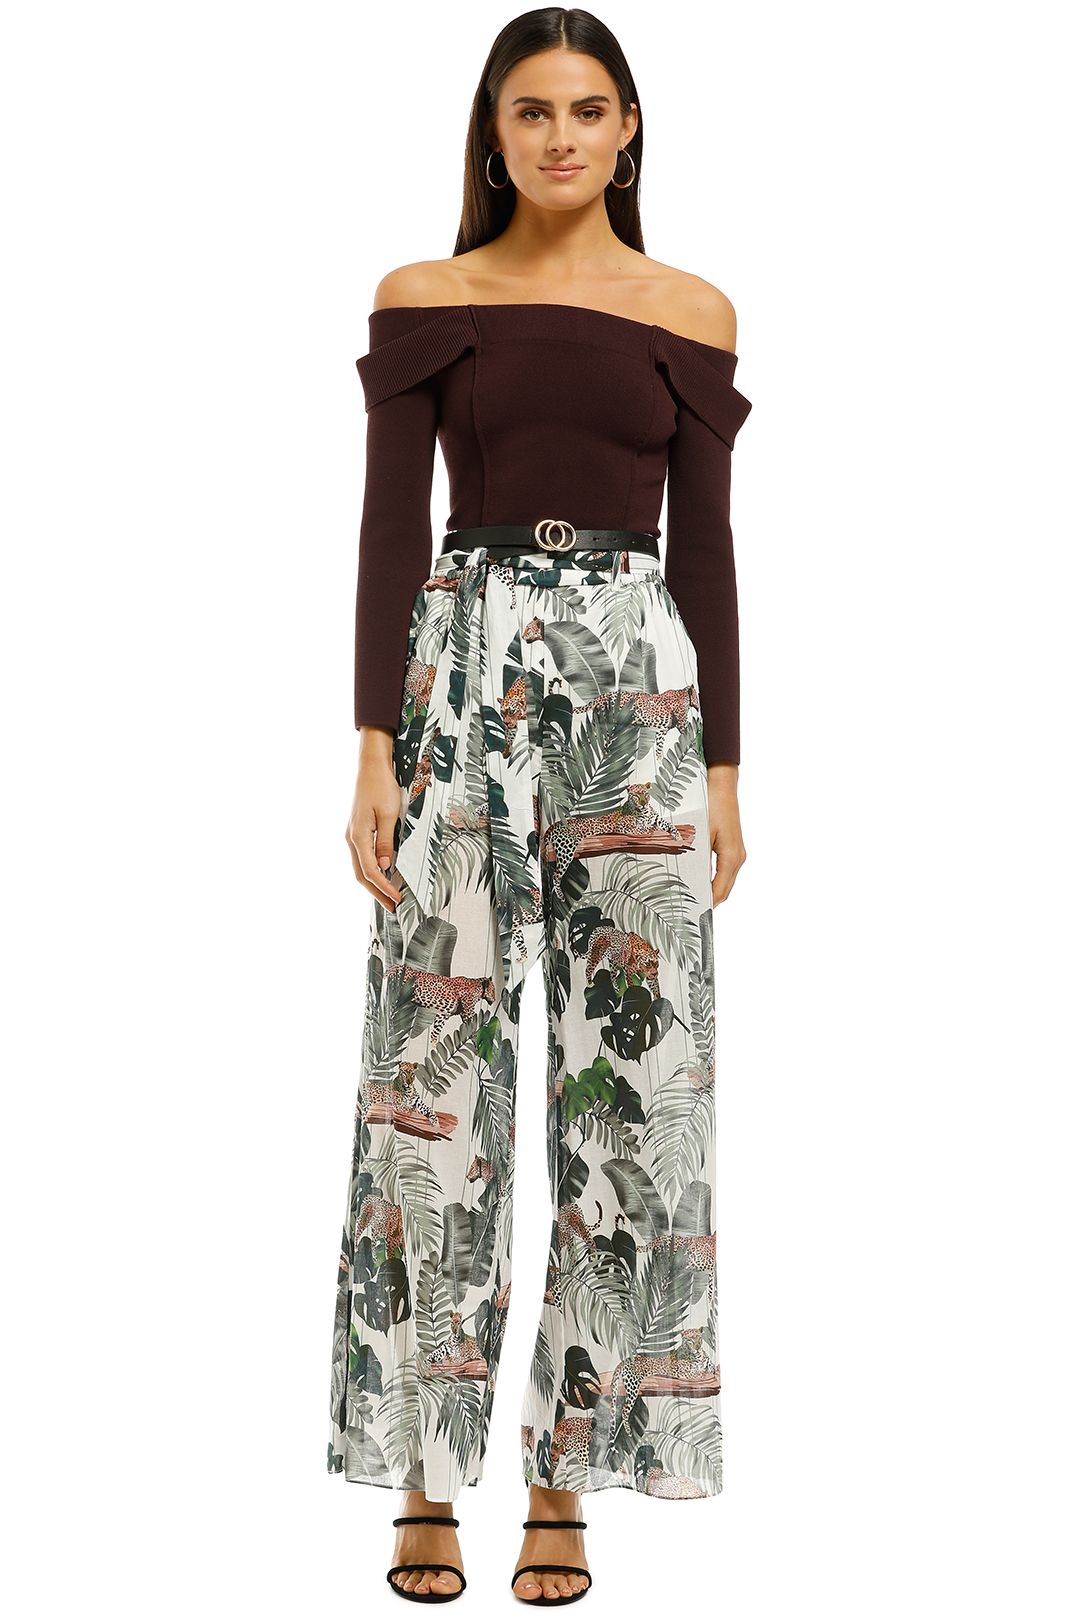 Suboo - Xenia Wide Leg Pant - Tropical Print - Front